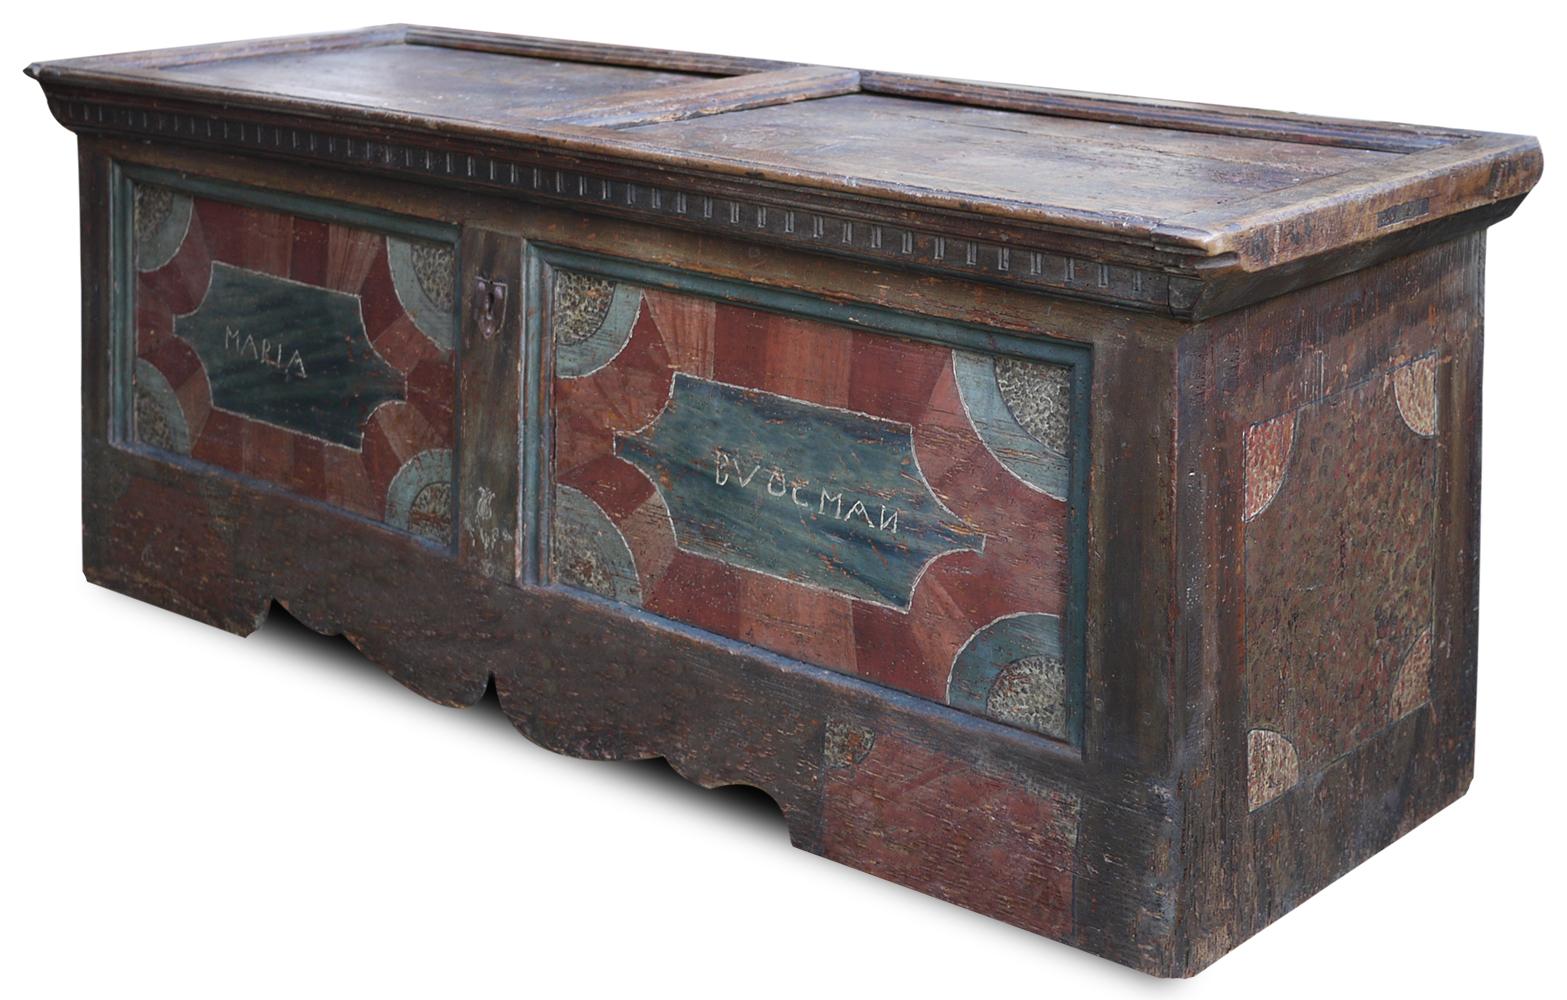 Ancient Tyrolean painted chest.

Measures: H. 70, L. 174, P. 63

Antique painted chest.
On the front it has two mirrors with geometric decorations and the name of the original clients. On the sides we find a similar geometric decoration.

All